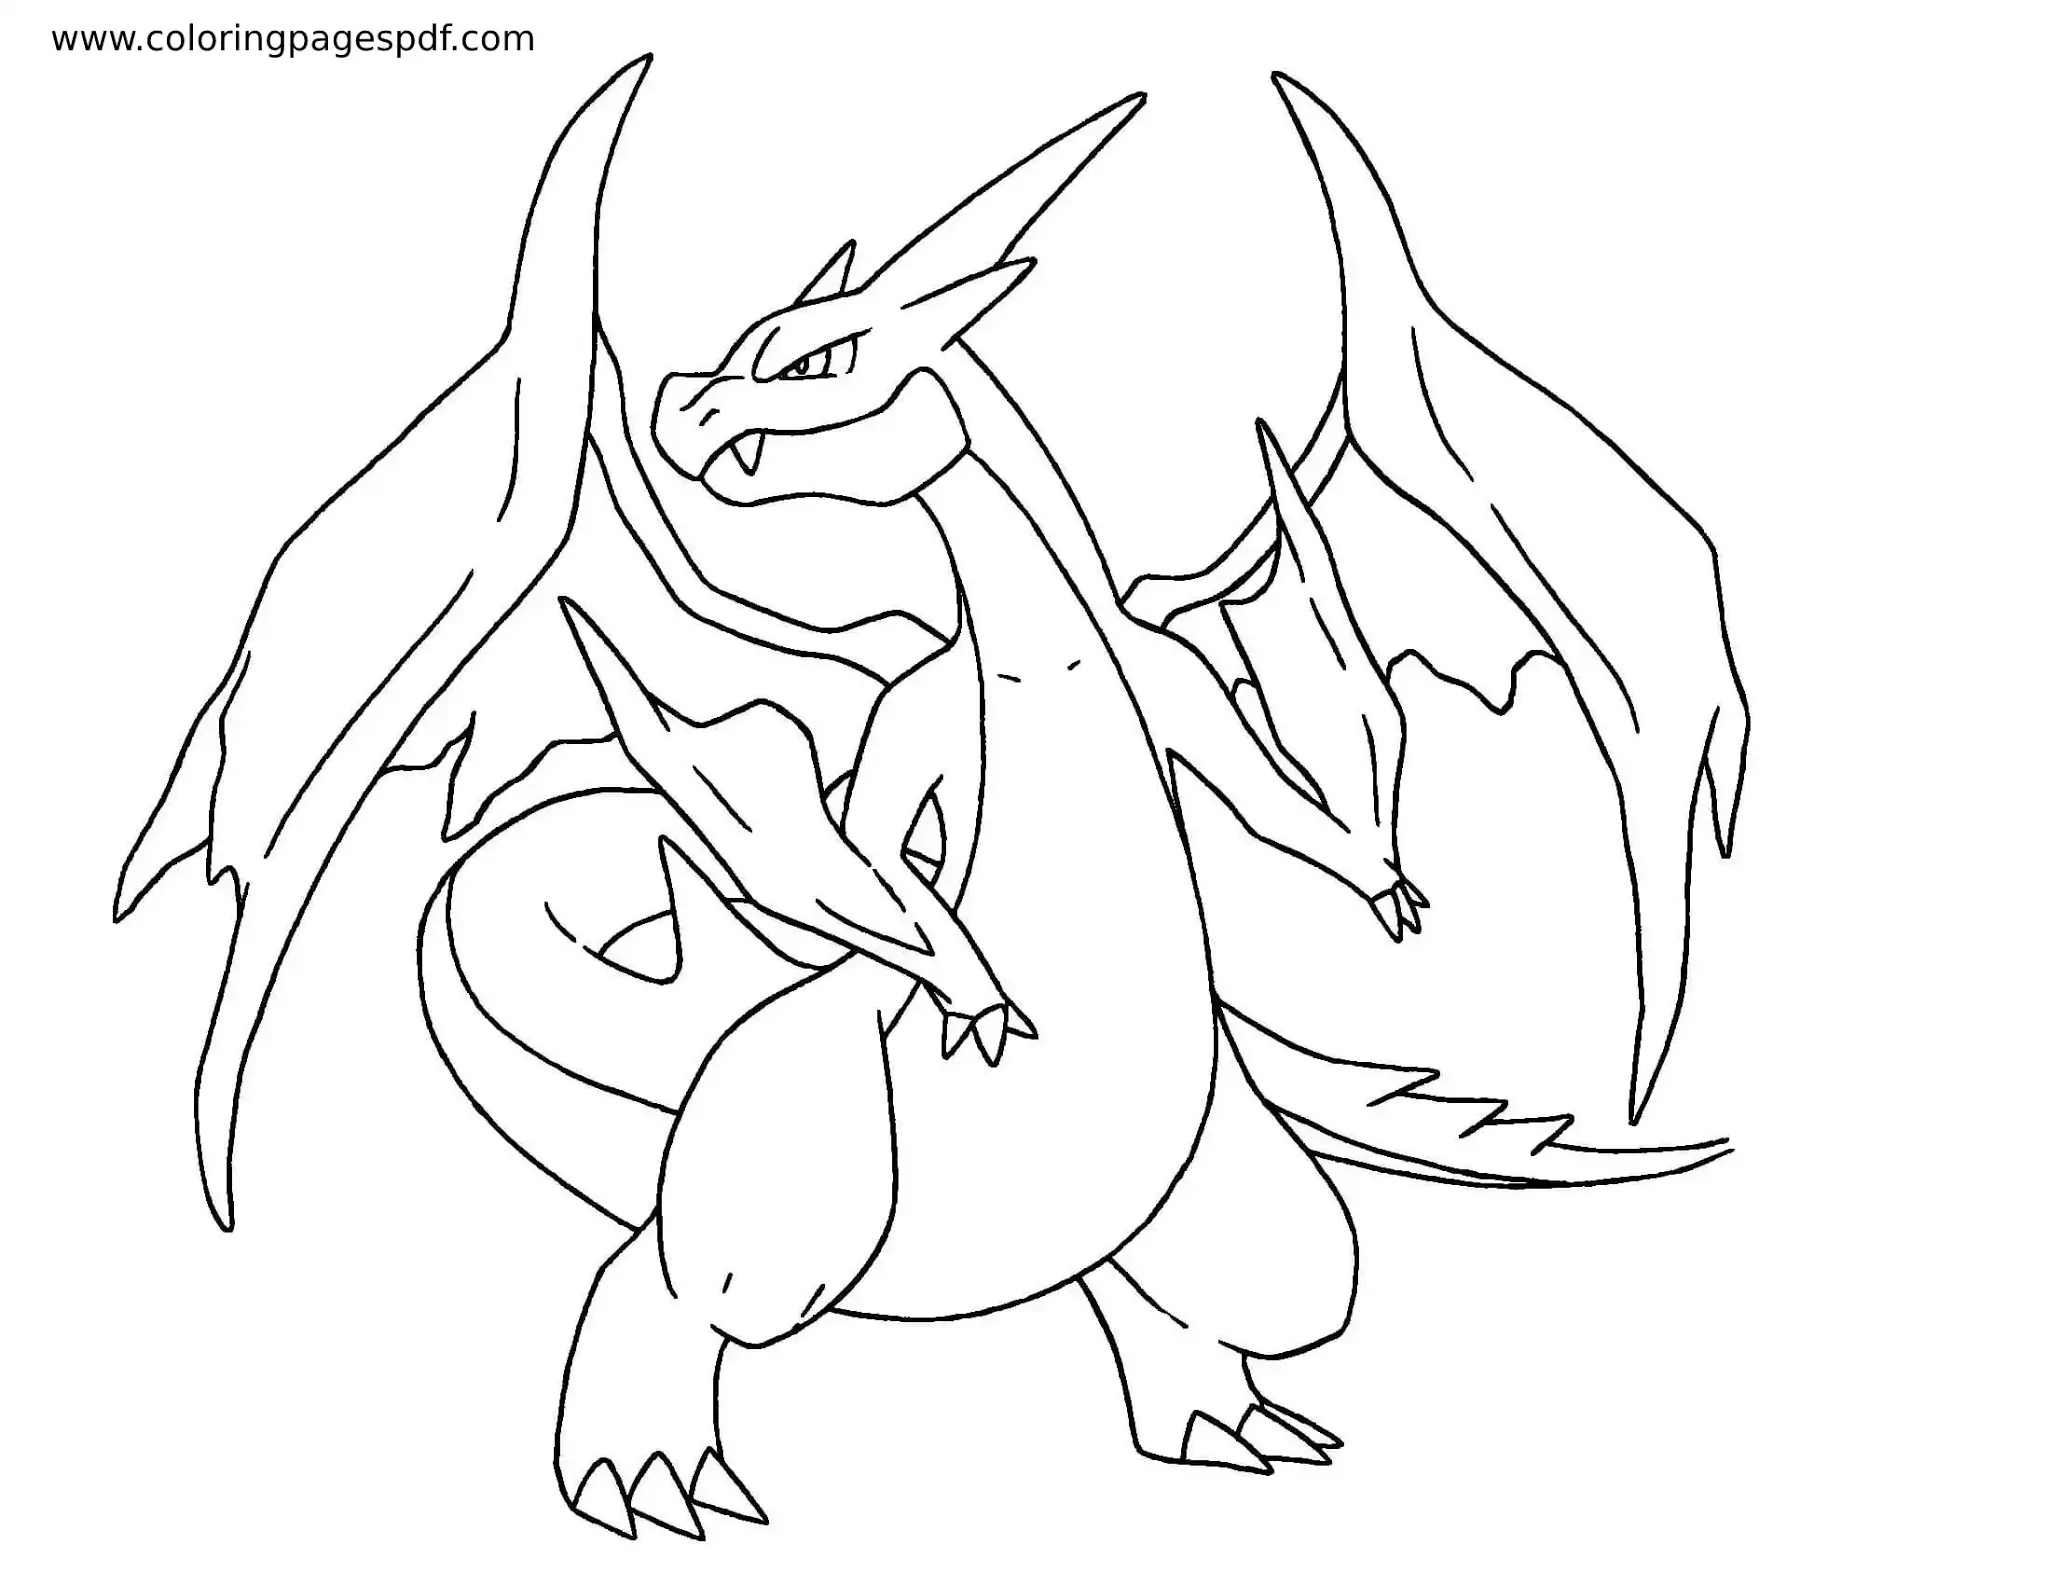 Coloring Page Of Charizard